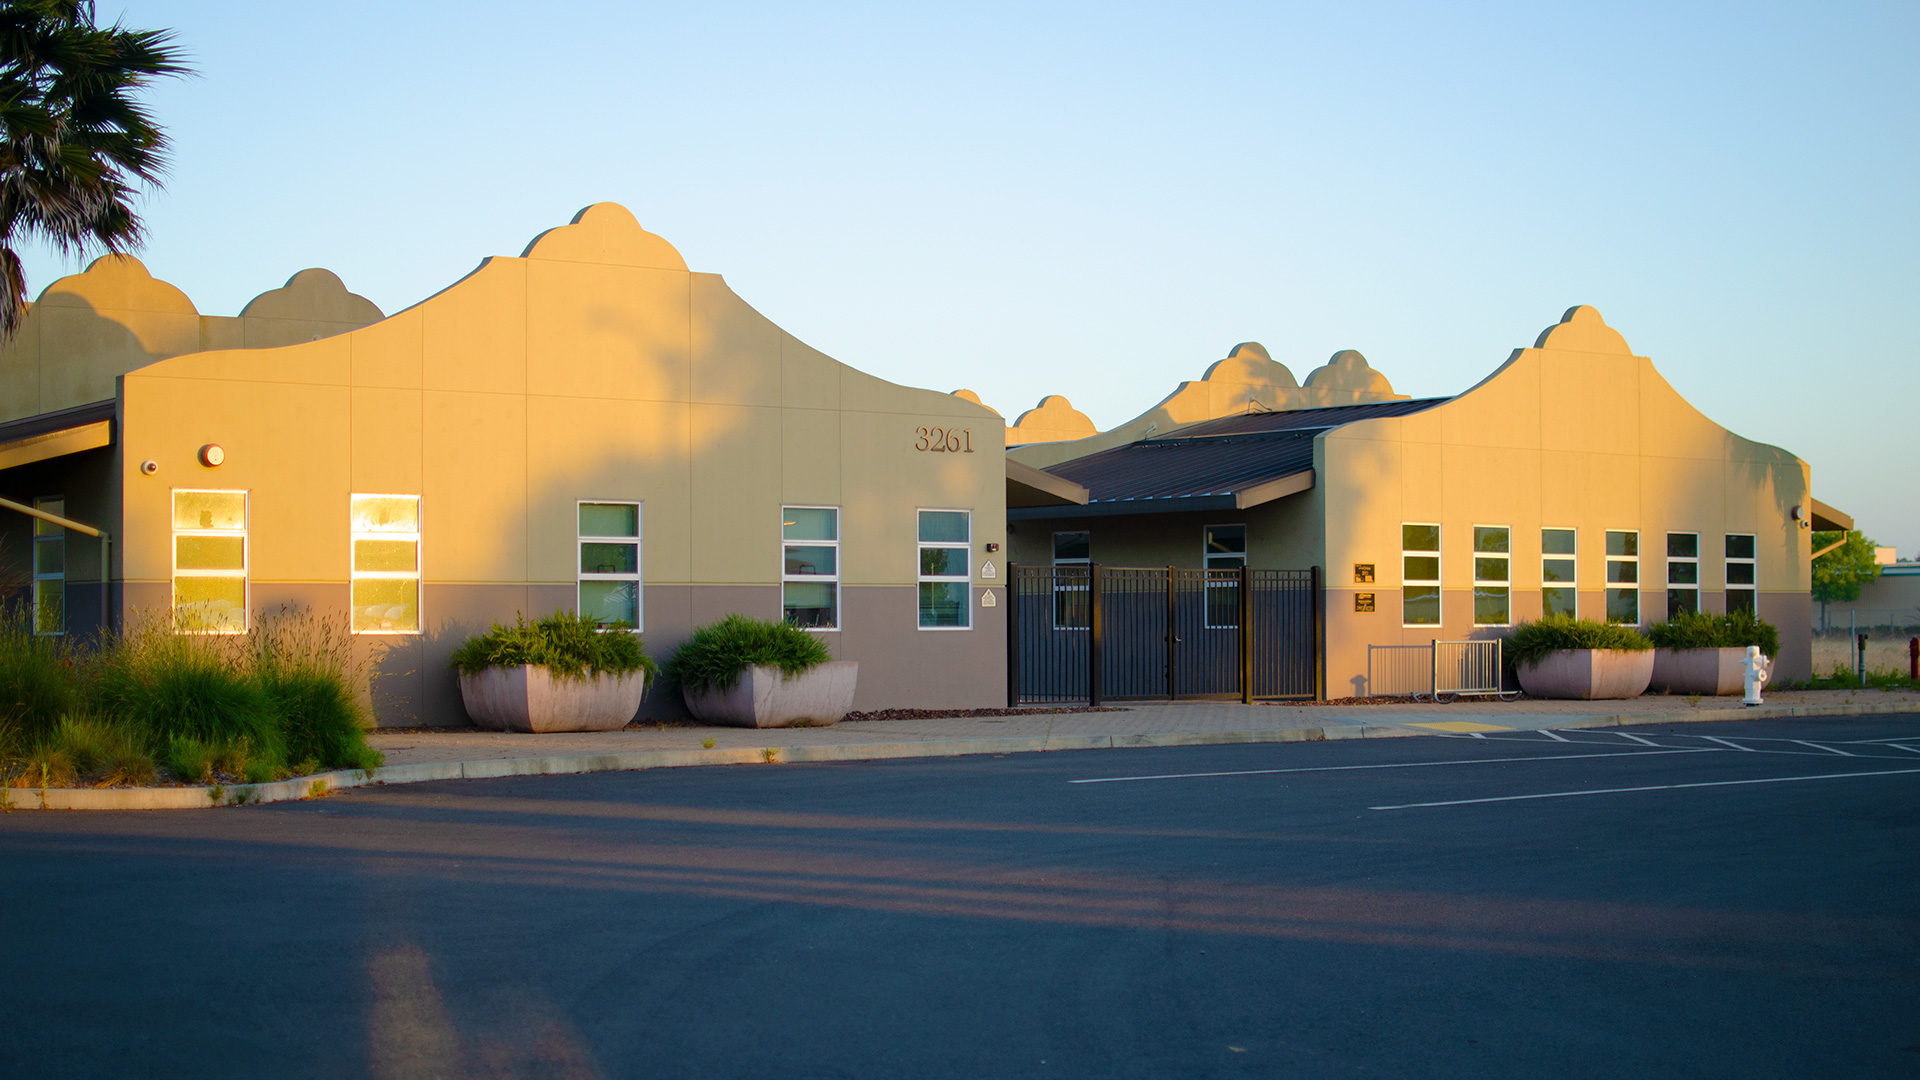 Entrance of school, with mission-style rooflines, beige walls, and gray wainscot. Front entrance is gated.